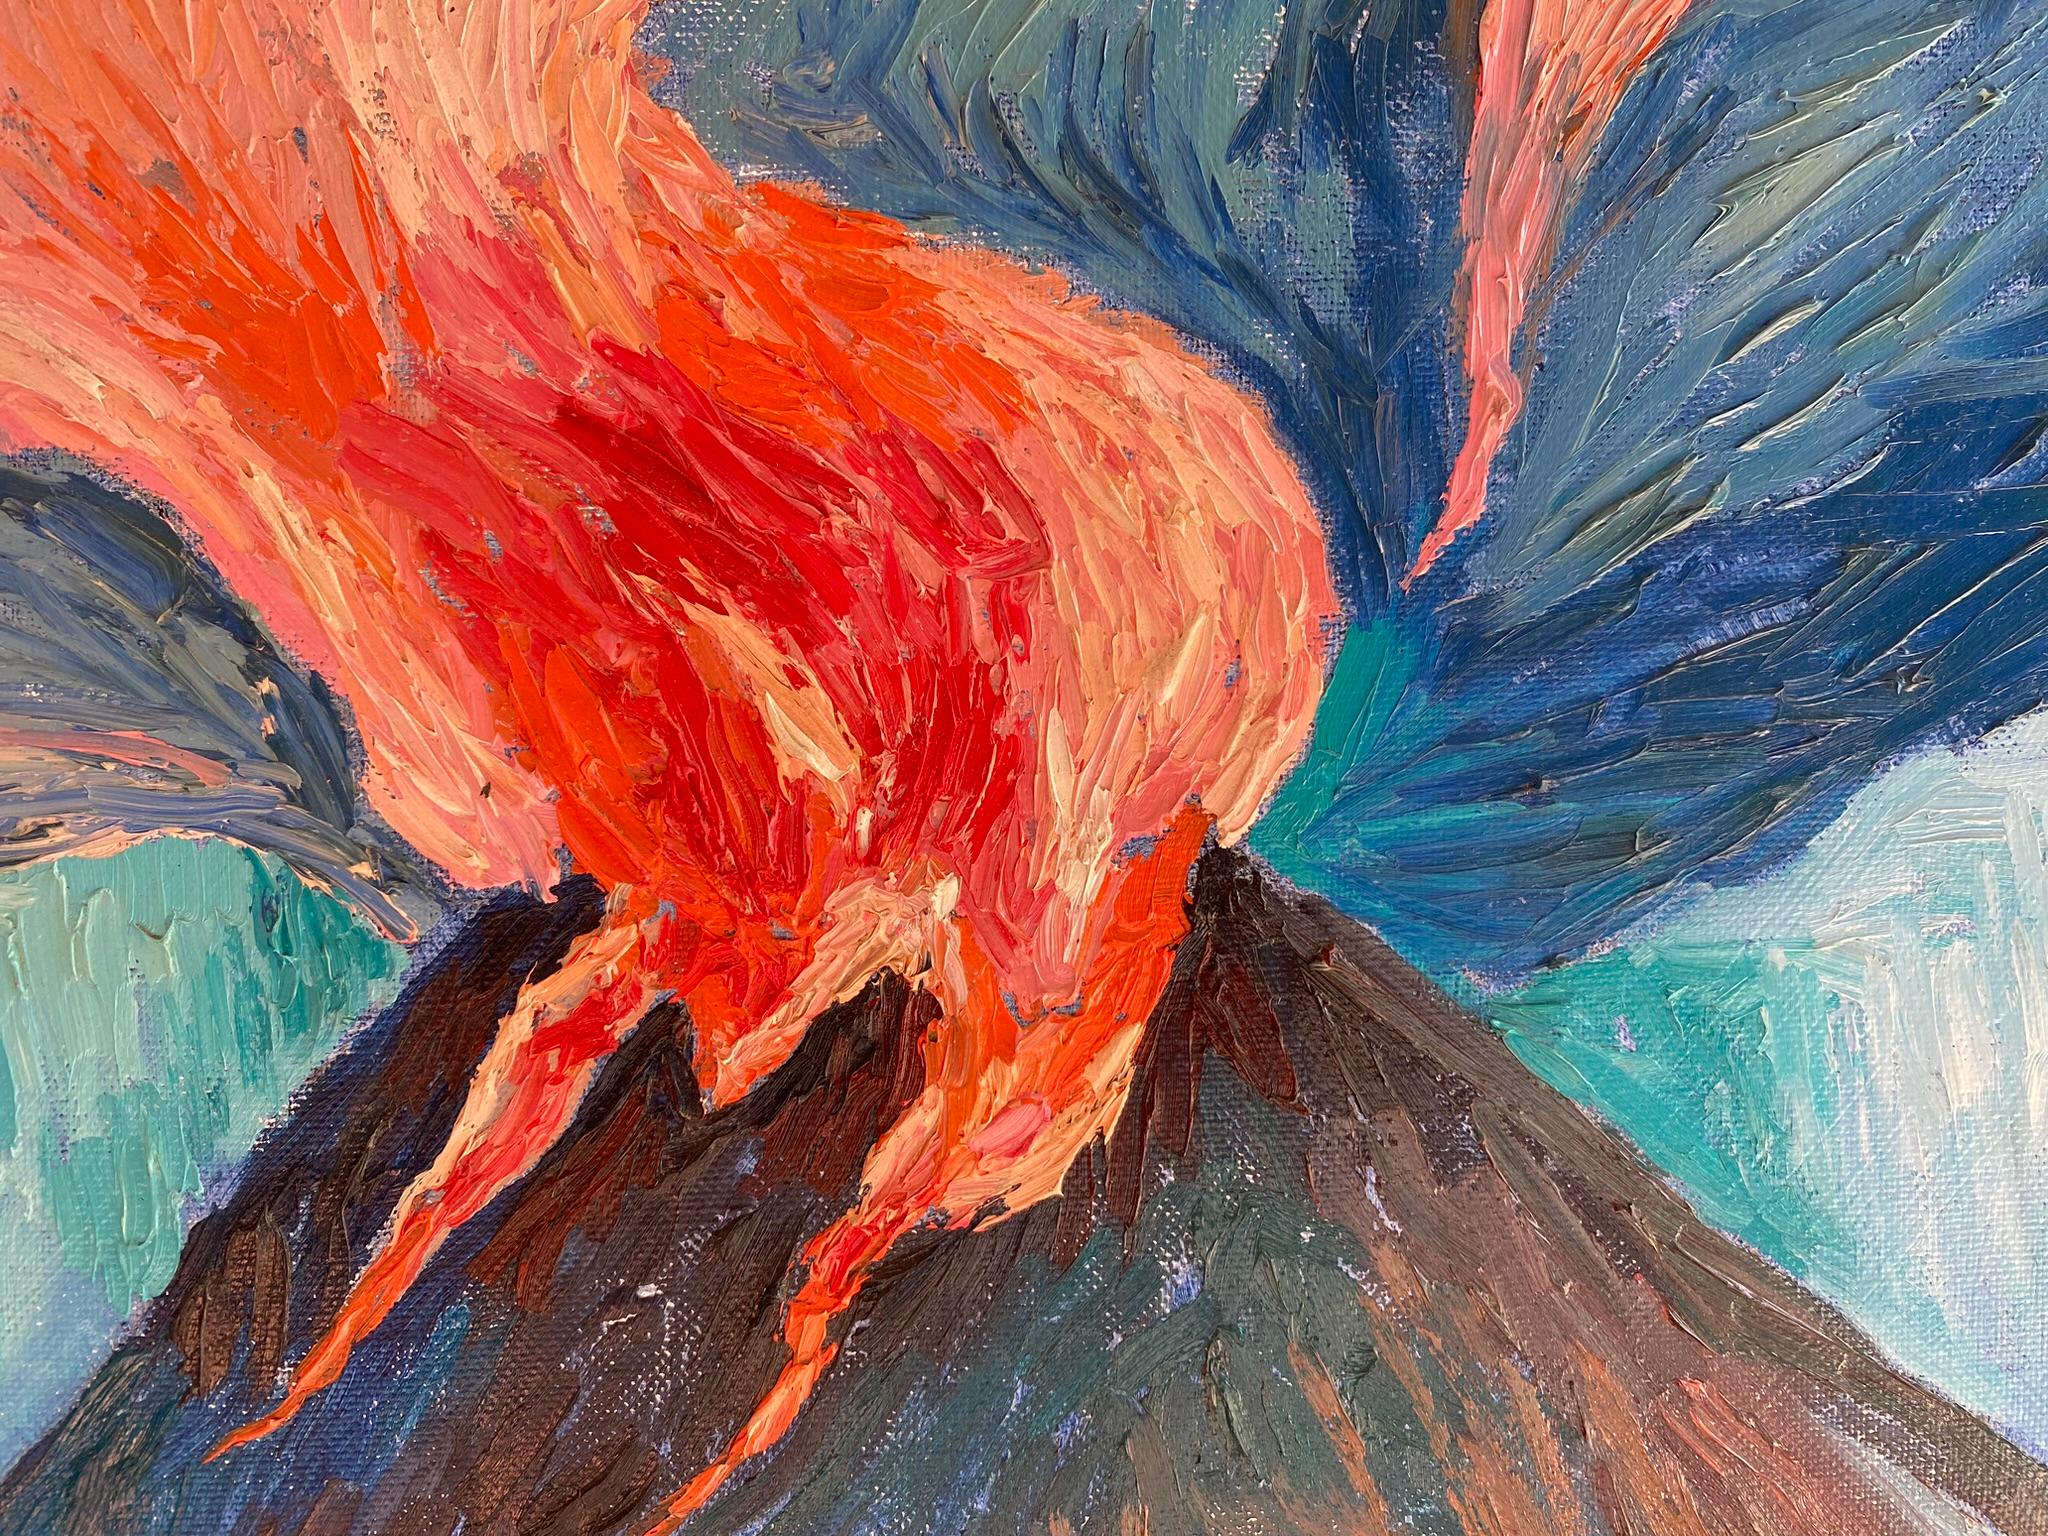 ABOUT THE ARTWORK
In the work “ORGASM”, the artist presents a powerful landscape composition embodying a volcanic eruption. This canvas is a vivid depiction of the riot of nature, where each stroke of paint plays an important role in creating an